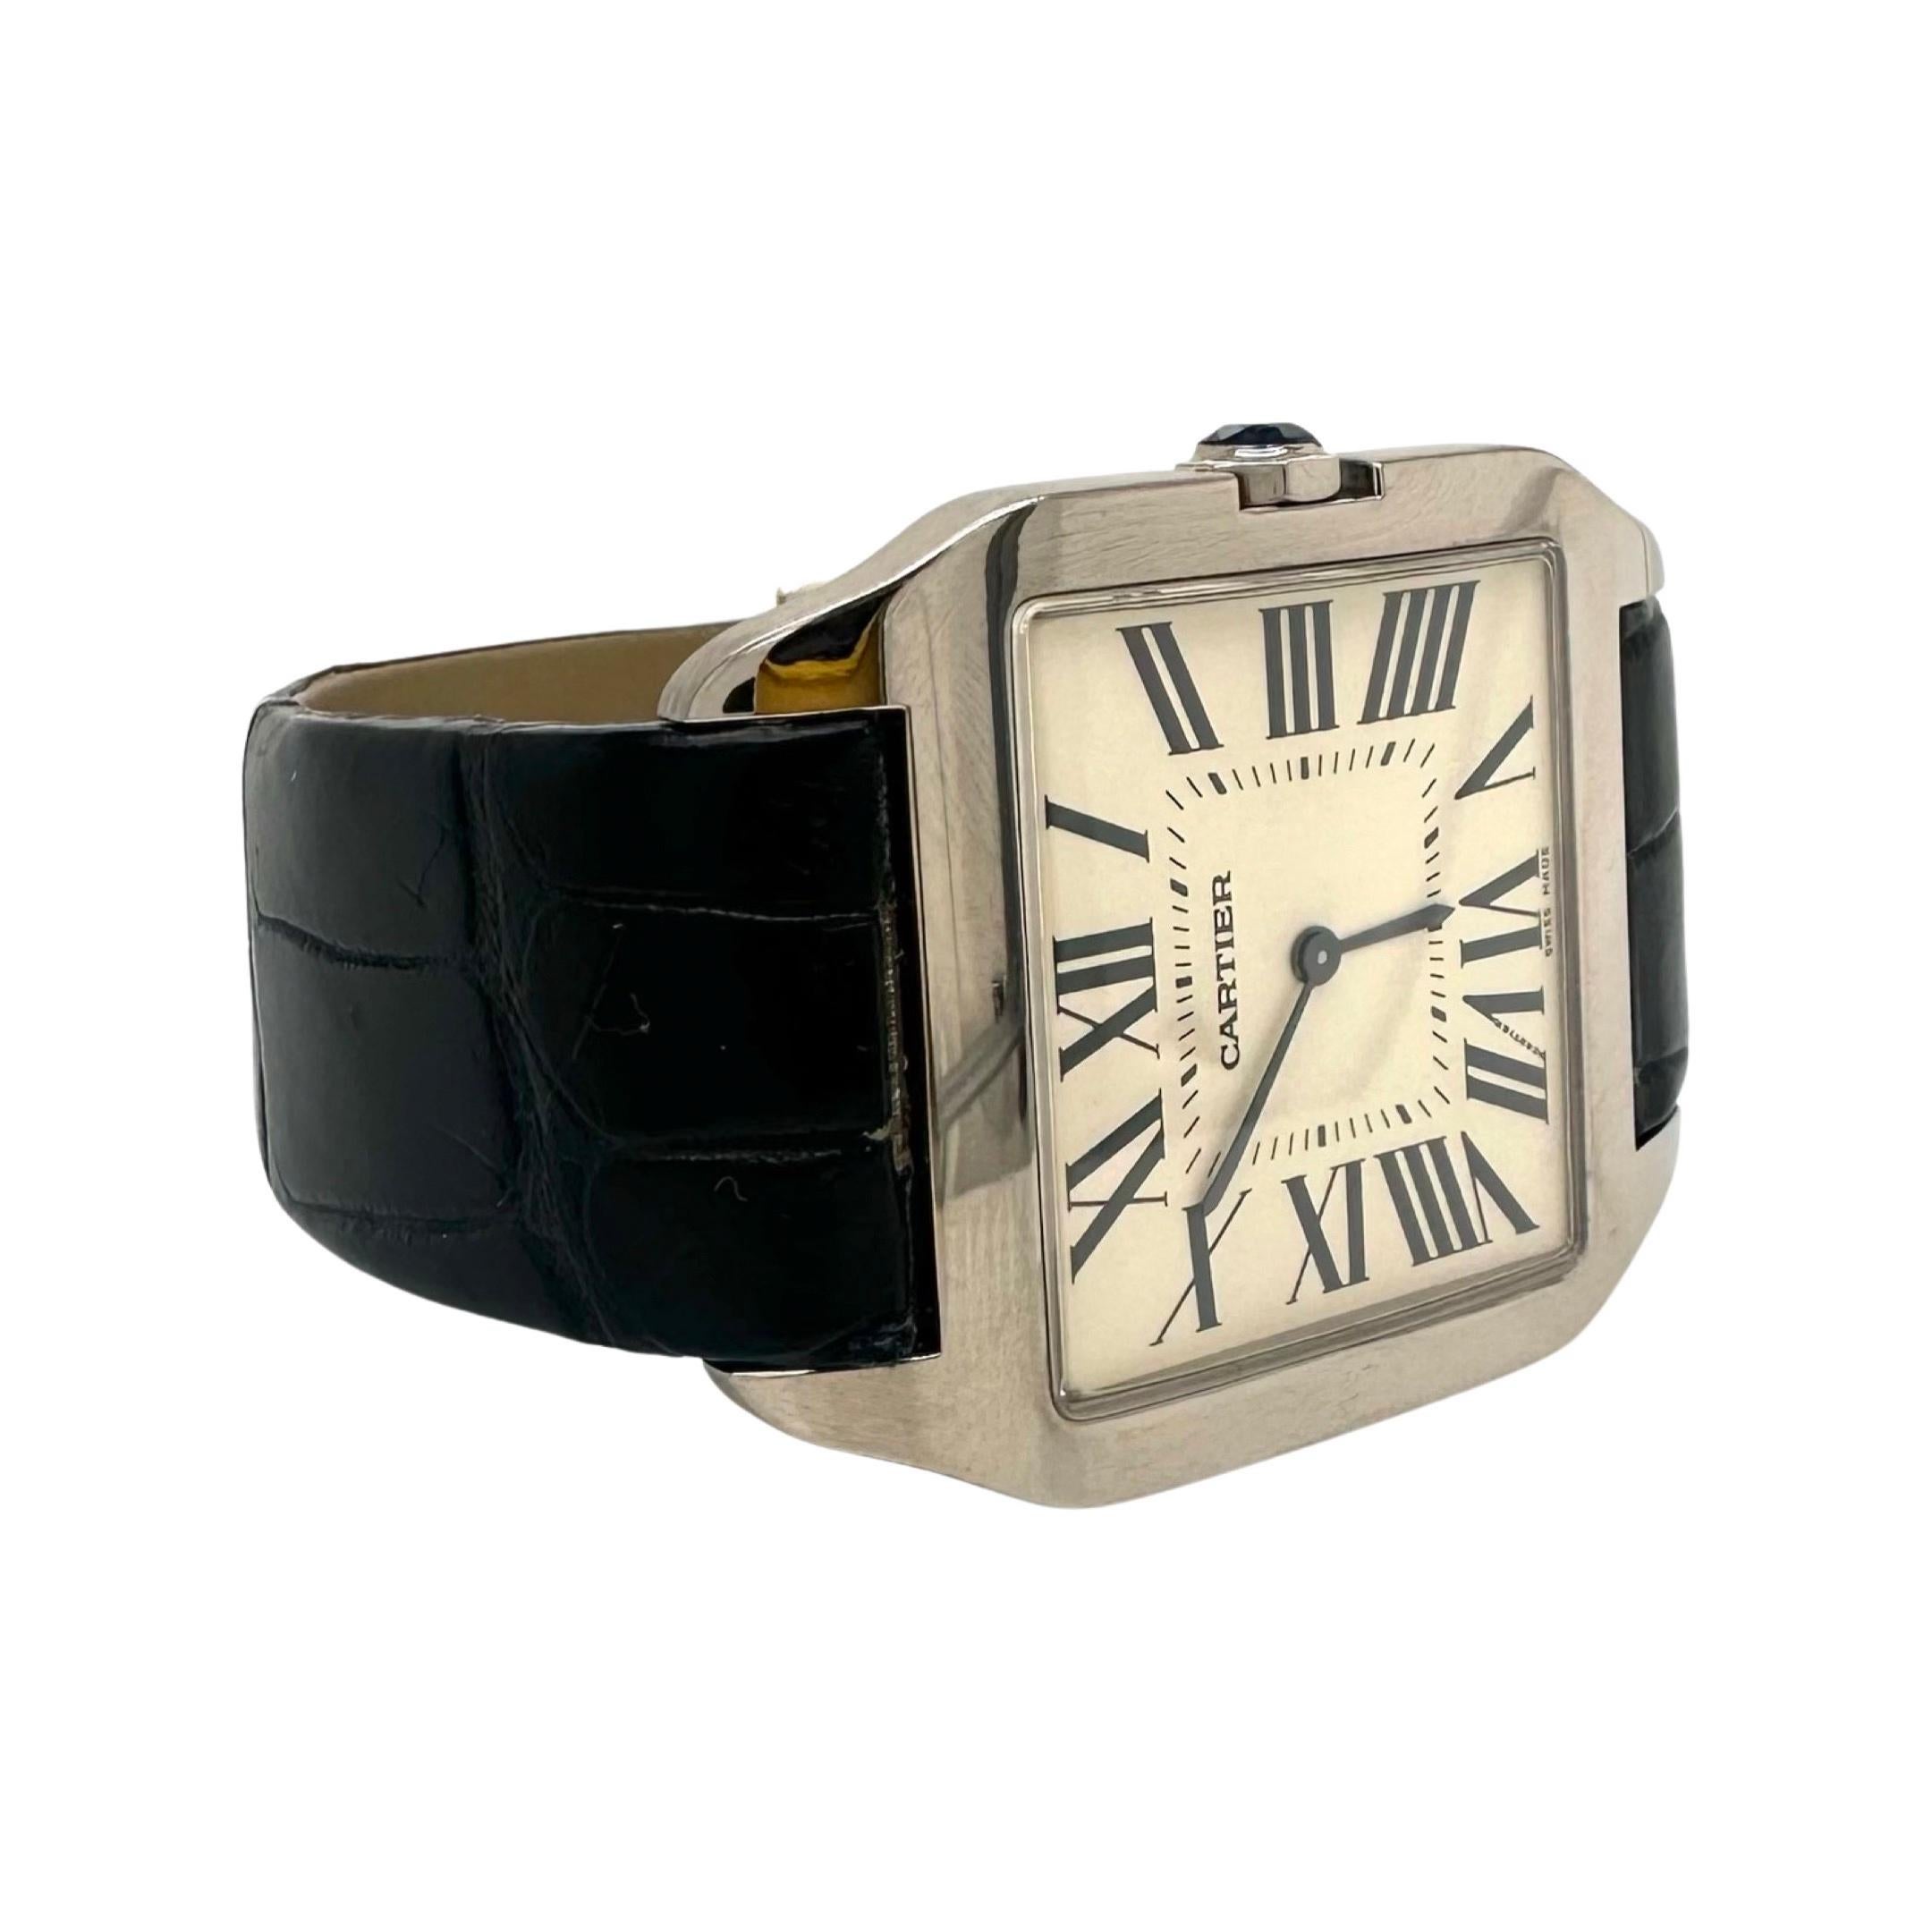 Brand: Cartier​​​​​​​

Model Name: Santos Dumont

Model Number: 2651

Movement: Automatic

Case Size: 35 mm 

Dial Color:  White

Metal: 18K White Gold​​​​​​​

Hour Markers: Roman Numerals 

Includes: Brilliance Jewels 2 Year Warranty

             